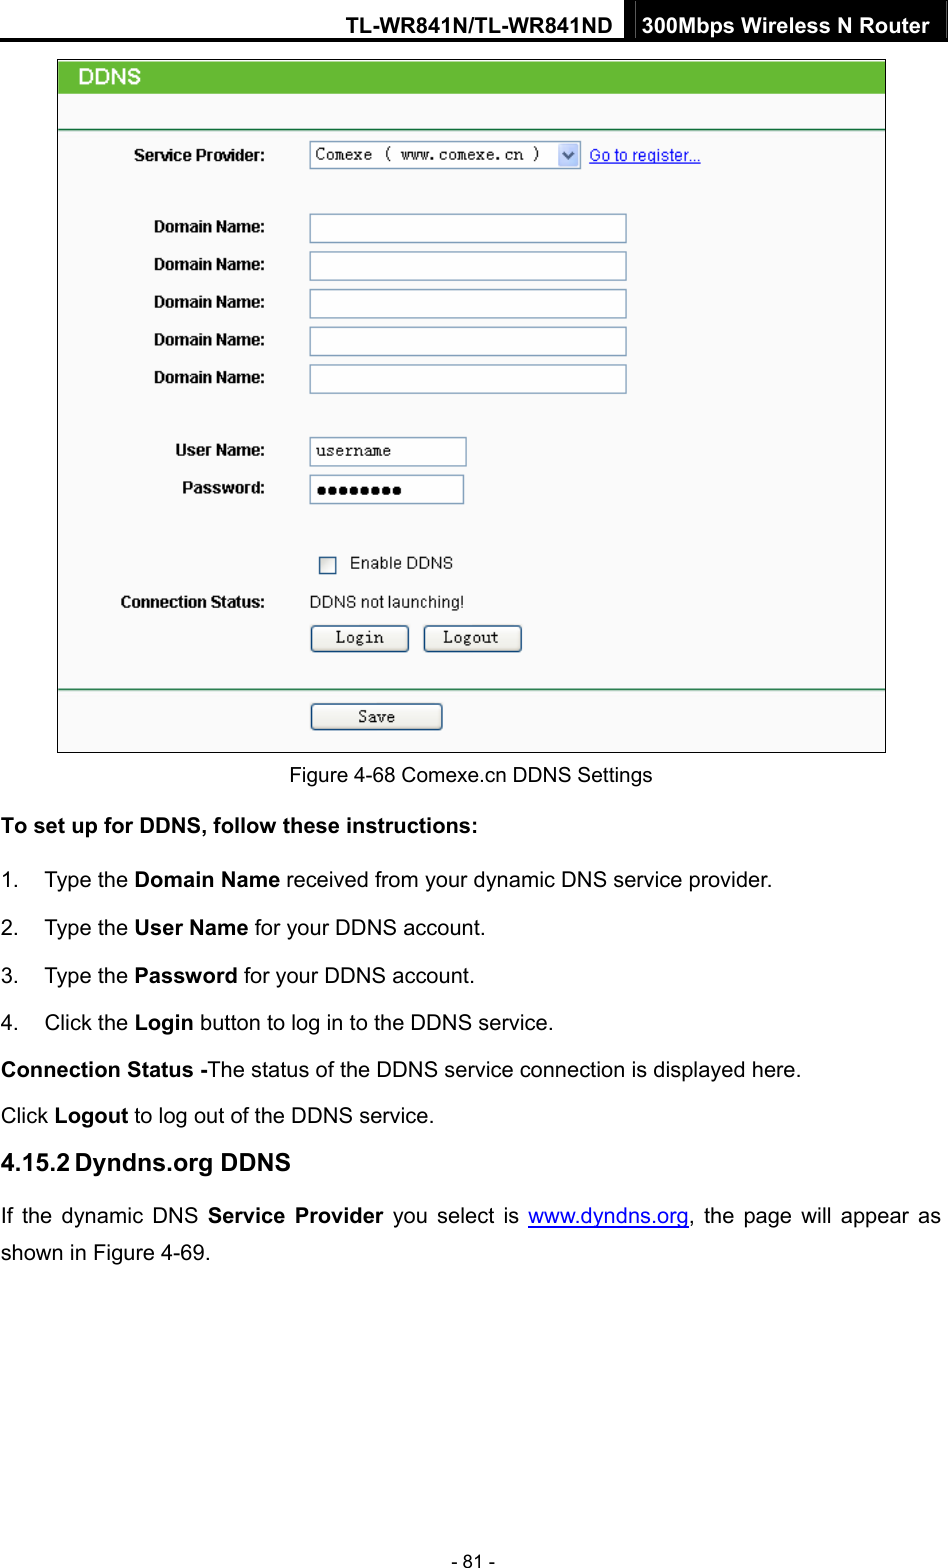 TL-WR841N/TL-WR841ND 300Mbps Wireless N Router - 81 -  Figure 4-68 Comexe.cn DDNS Settings To set up for DDNS, follow these instructions: 1. Type the Domain Name received from your dynamic DNS service provider.     2. Type the User Name for your DDNS account.   3. Type the Password for your DDNS account.   4. Click the Login button to log in to the DDNS service. Connection Status -The status of the DDNS service connection is displayed here. Click Logout to log out of the DDNS service.   4.15.2 Dyndns.org DDNS If the dynamic DNS Service Provider you select is www.dyndns.org, the page will appear as shown in Figure 4-69. 